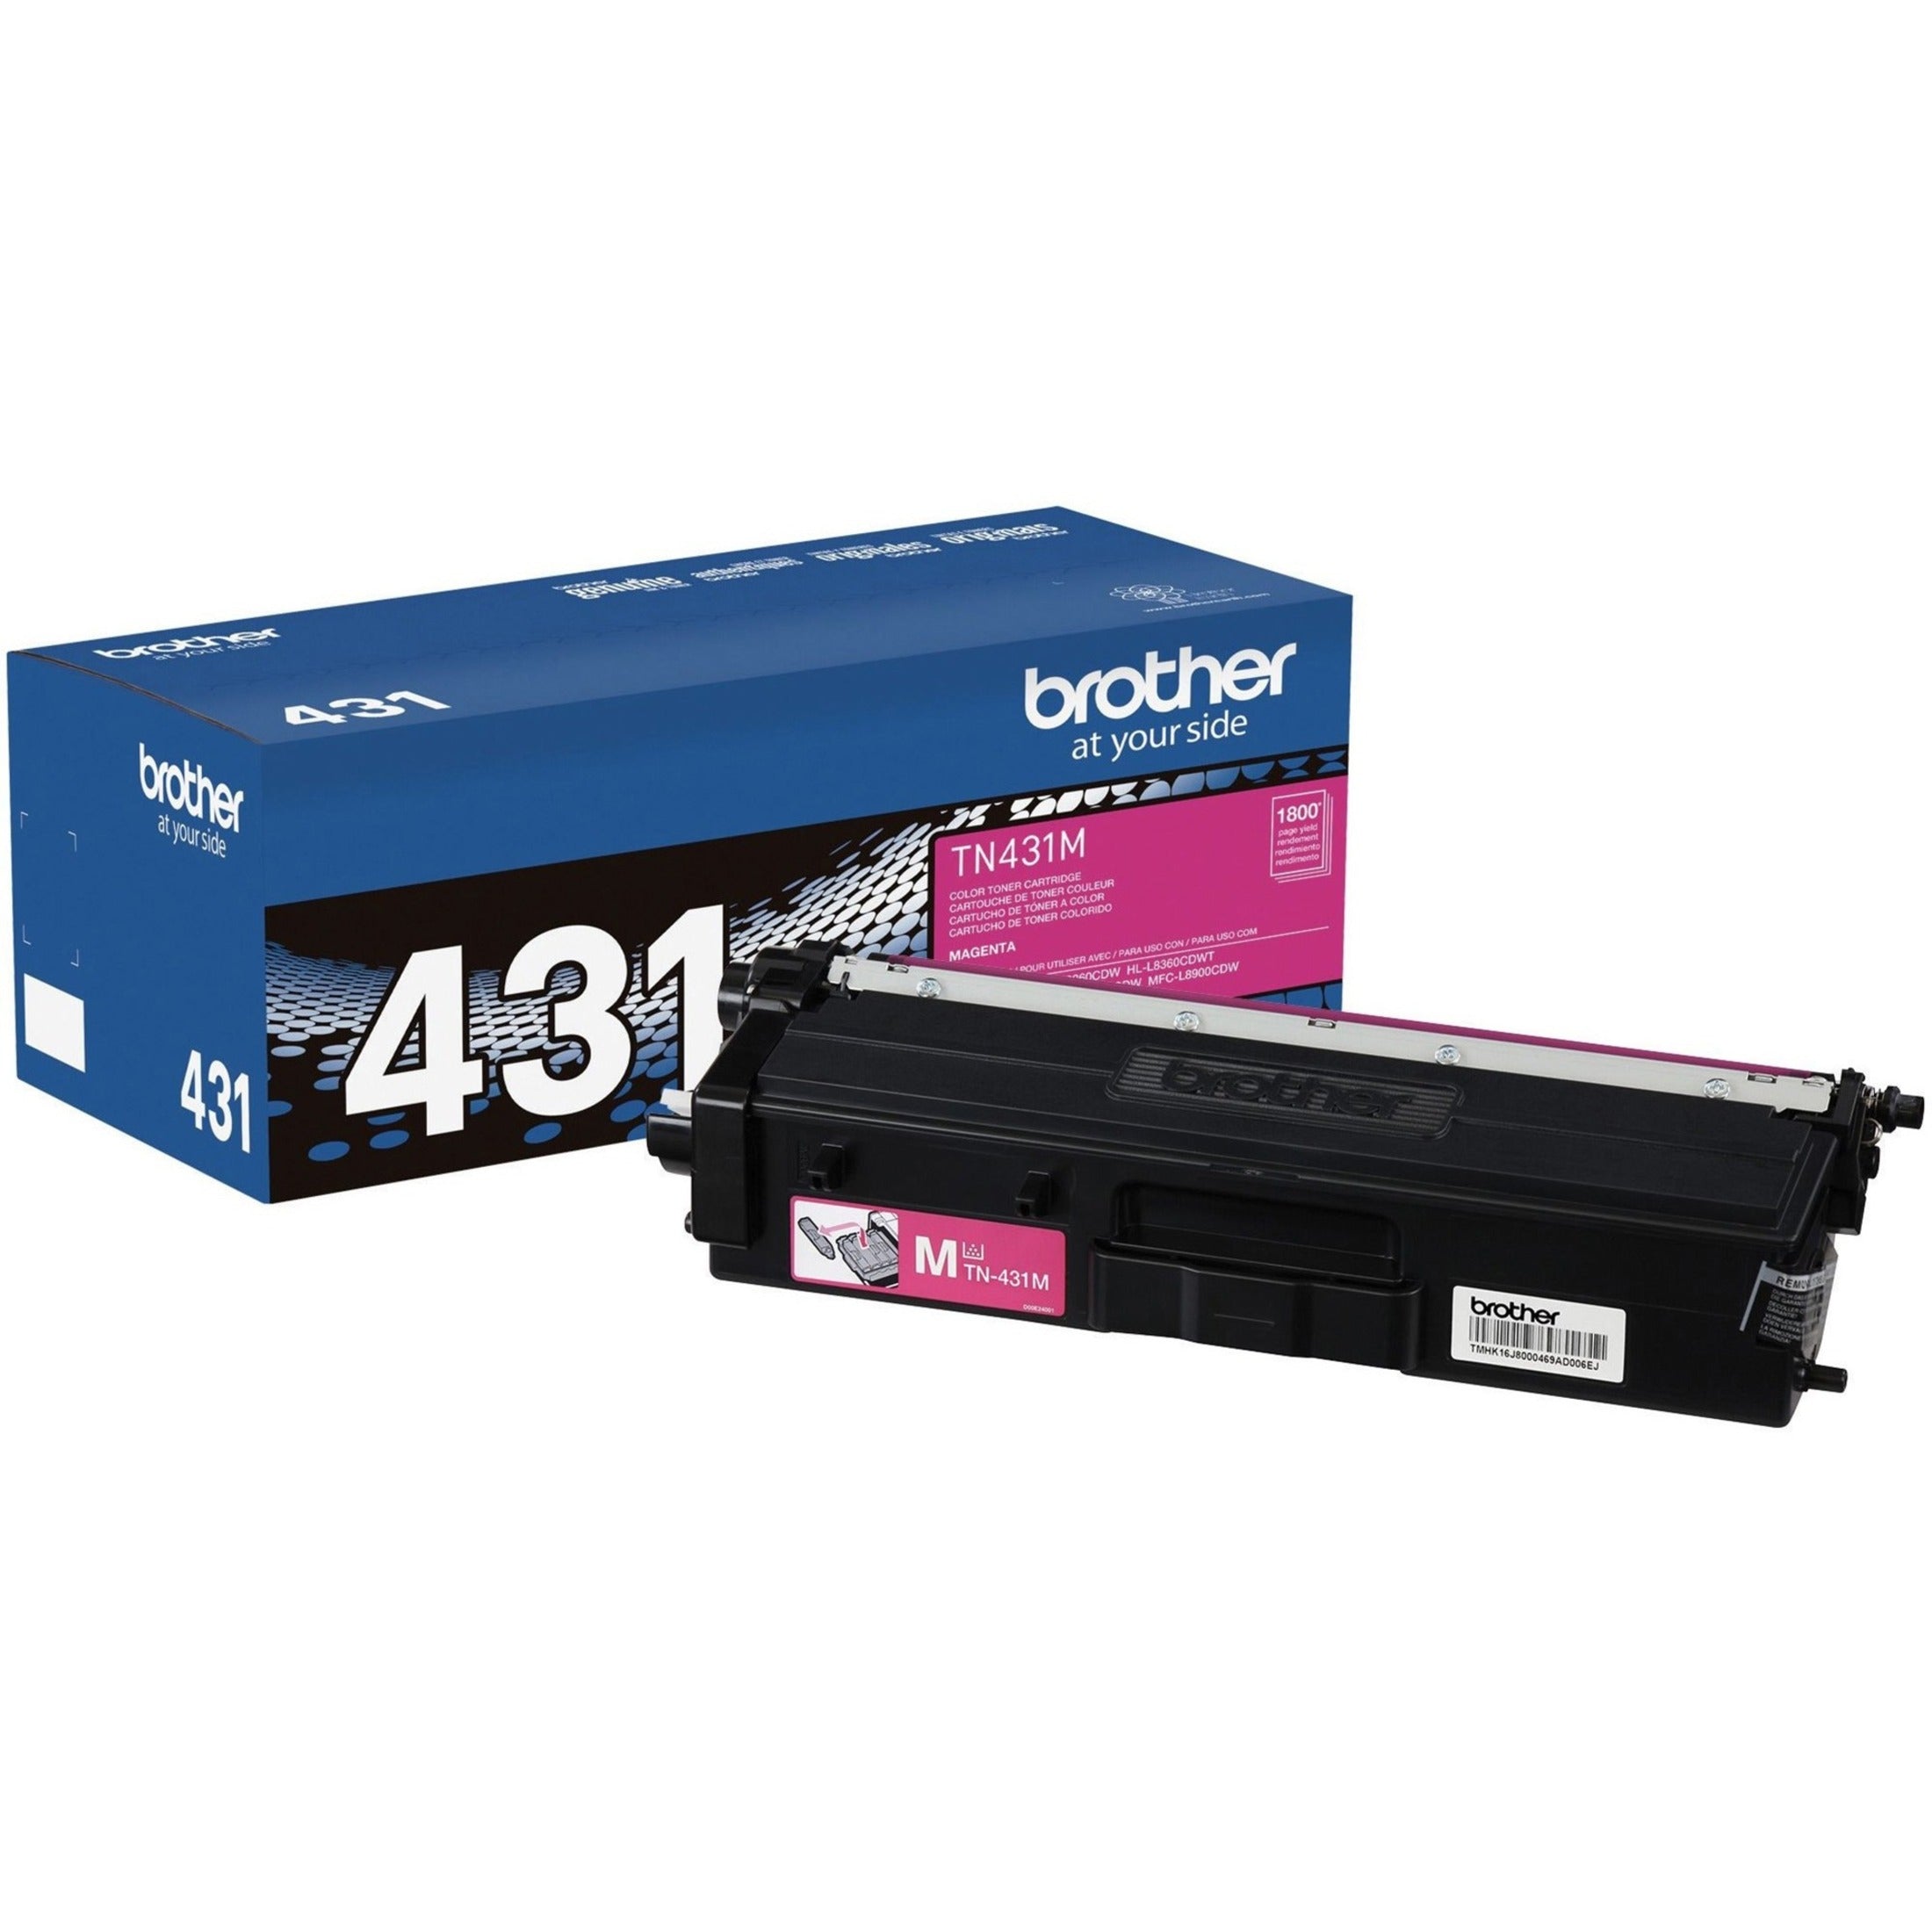 Brother TN431M Toner Cartridge Magenta 1800 Pages Standard Yield